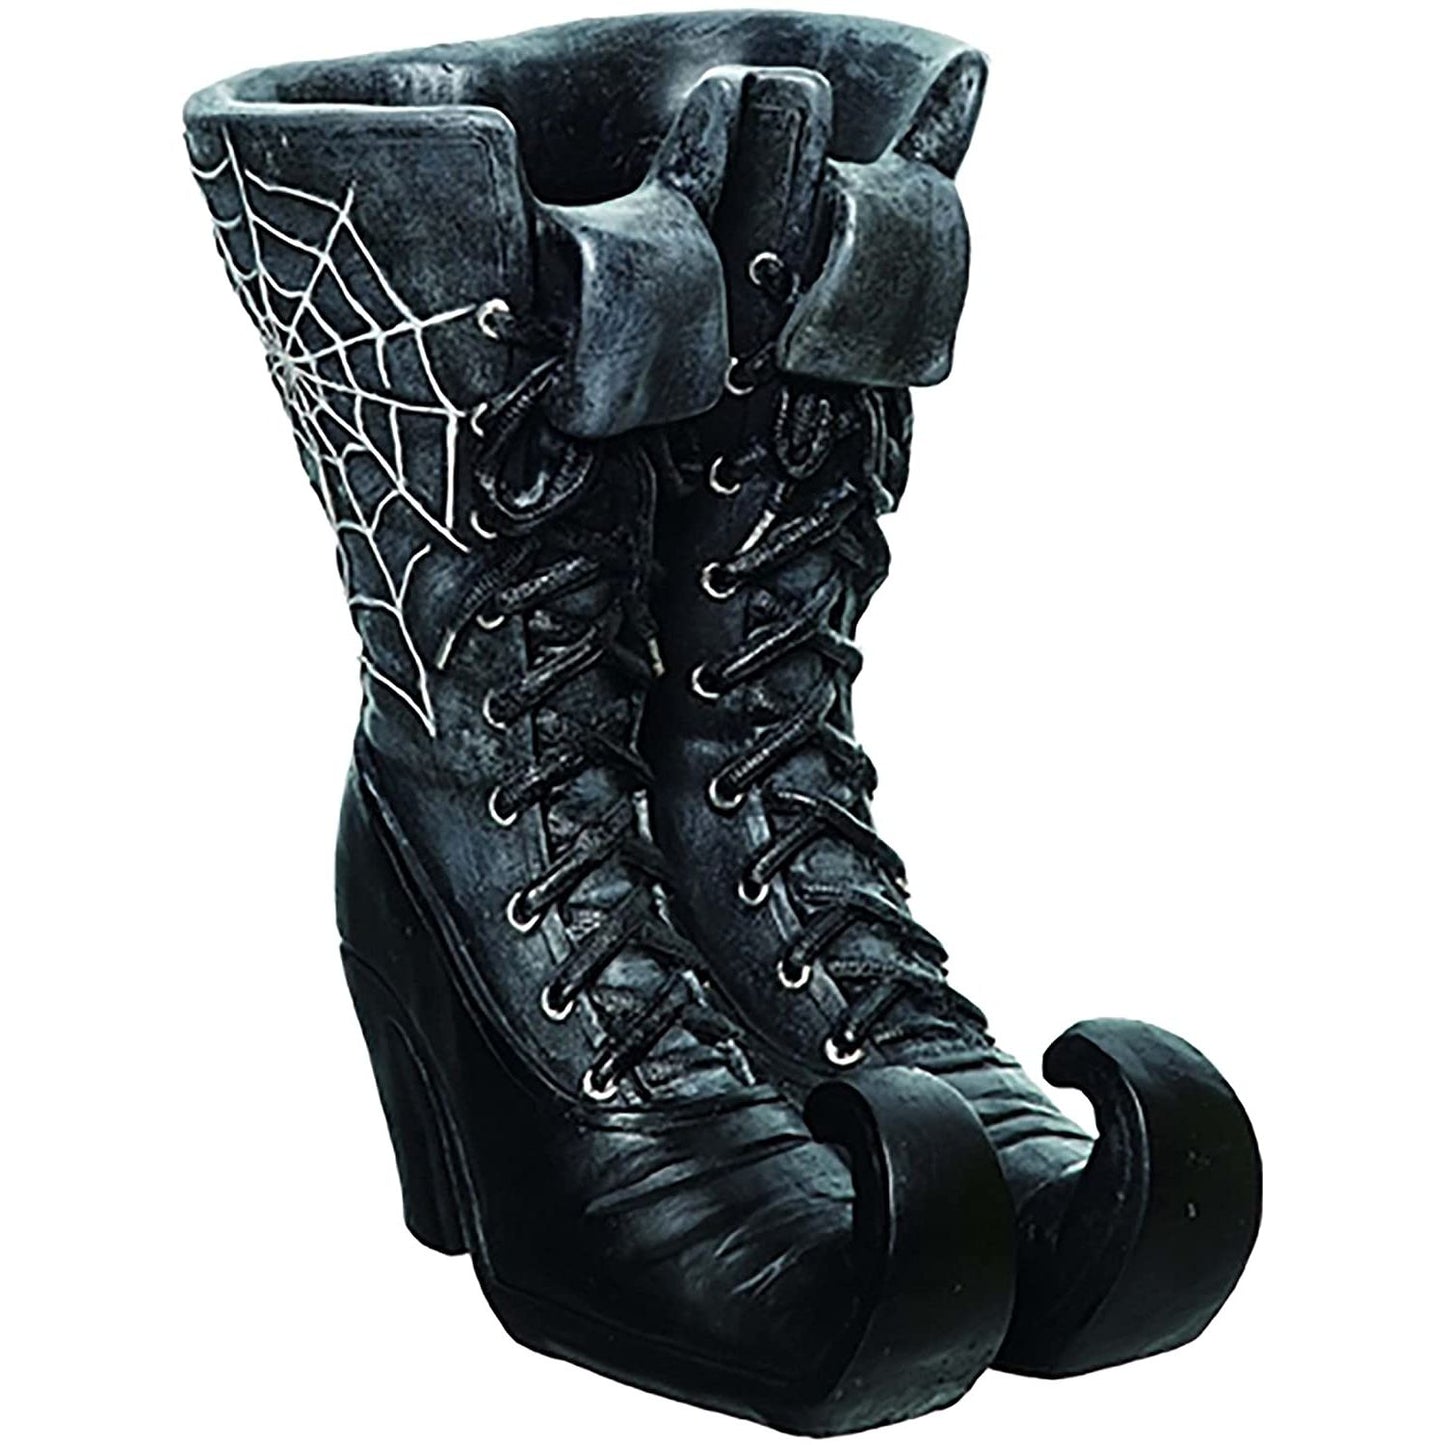 Transpac Resin Web Witch Boot Container